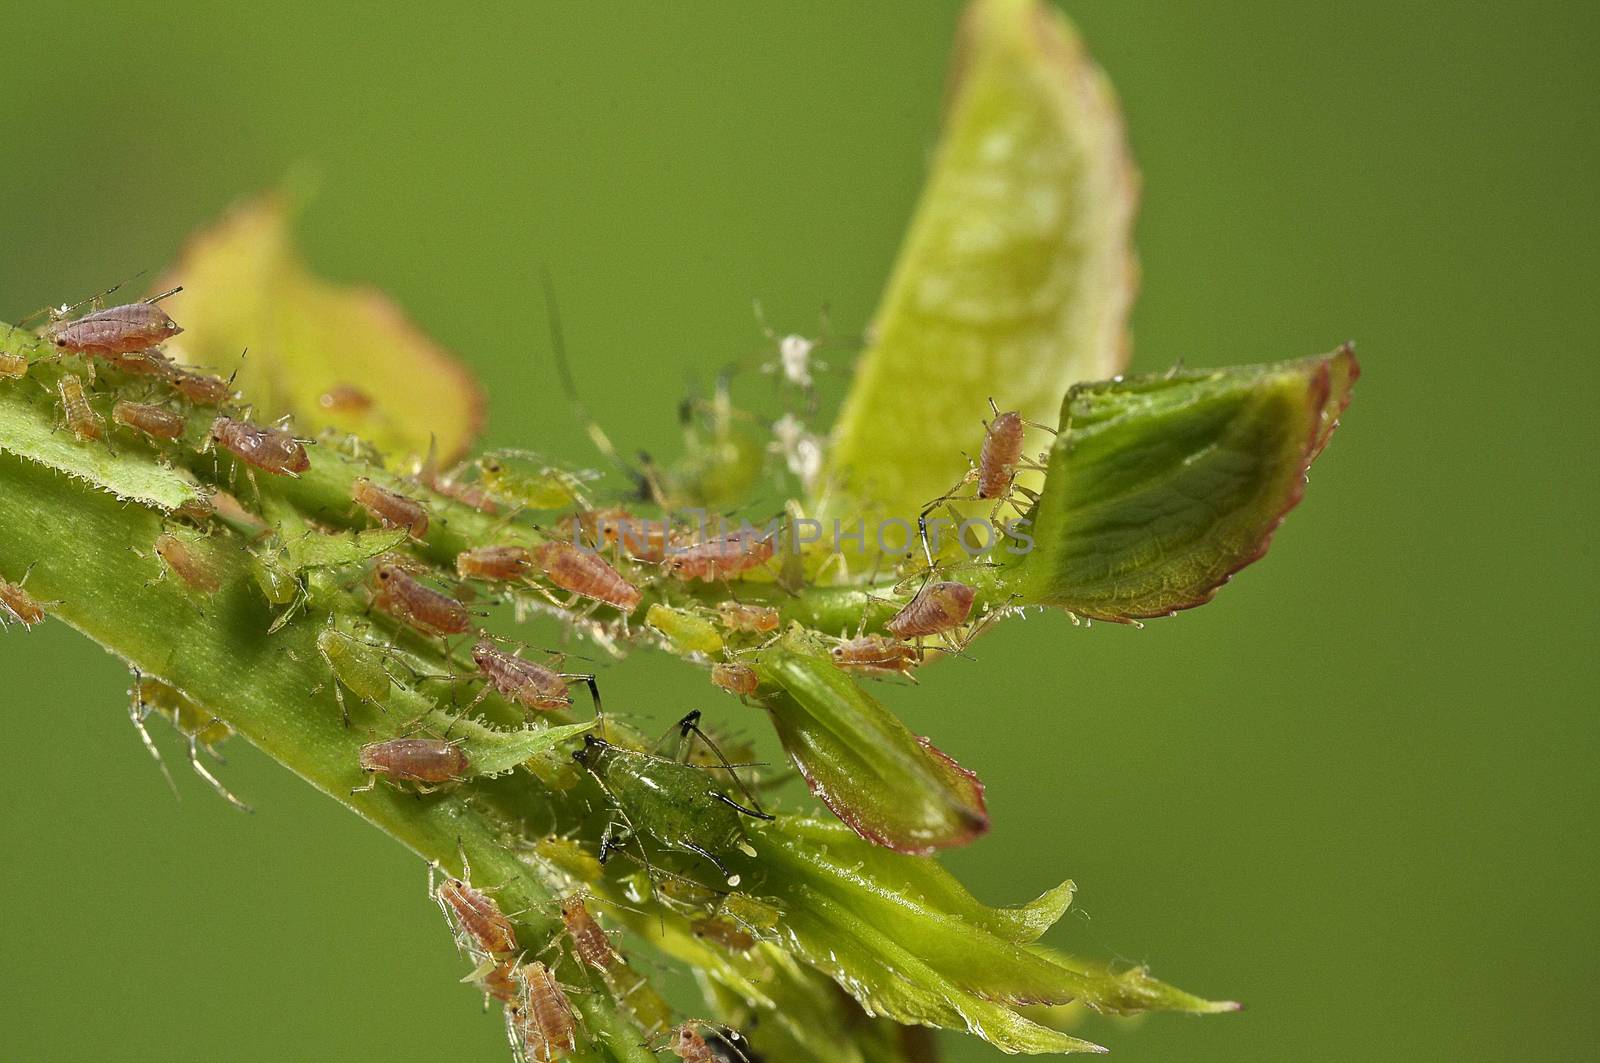 Aphid on rose branch by jalonsohu@gmail.com